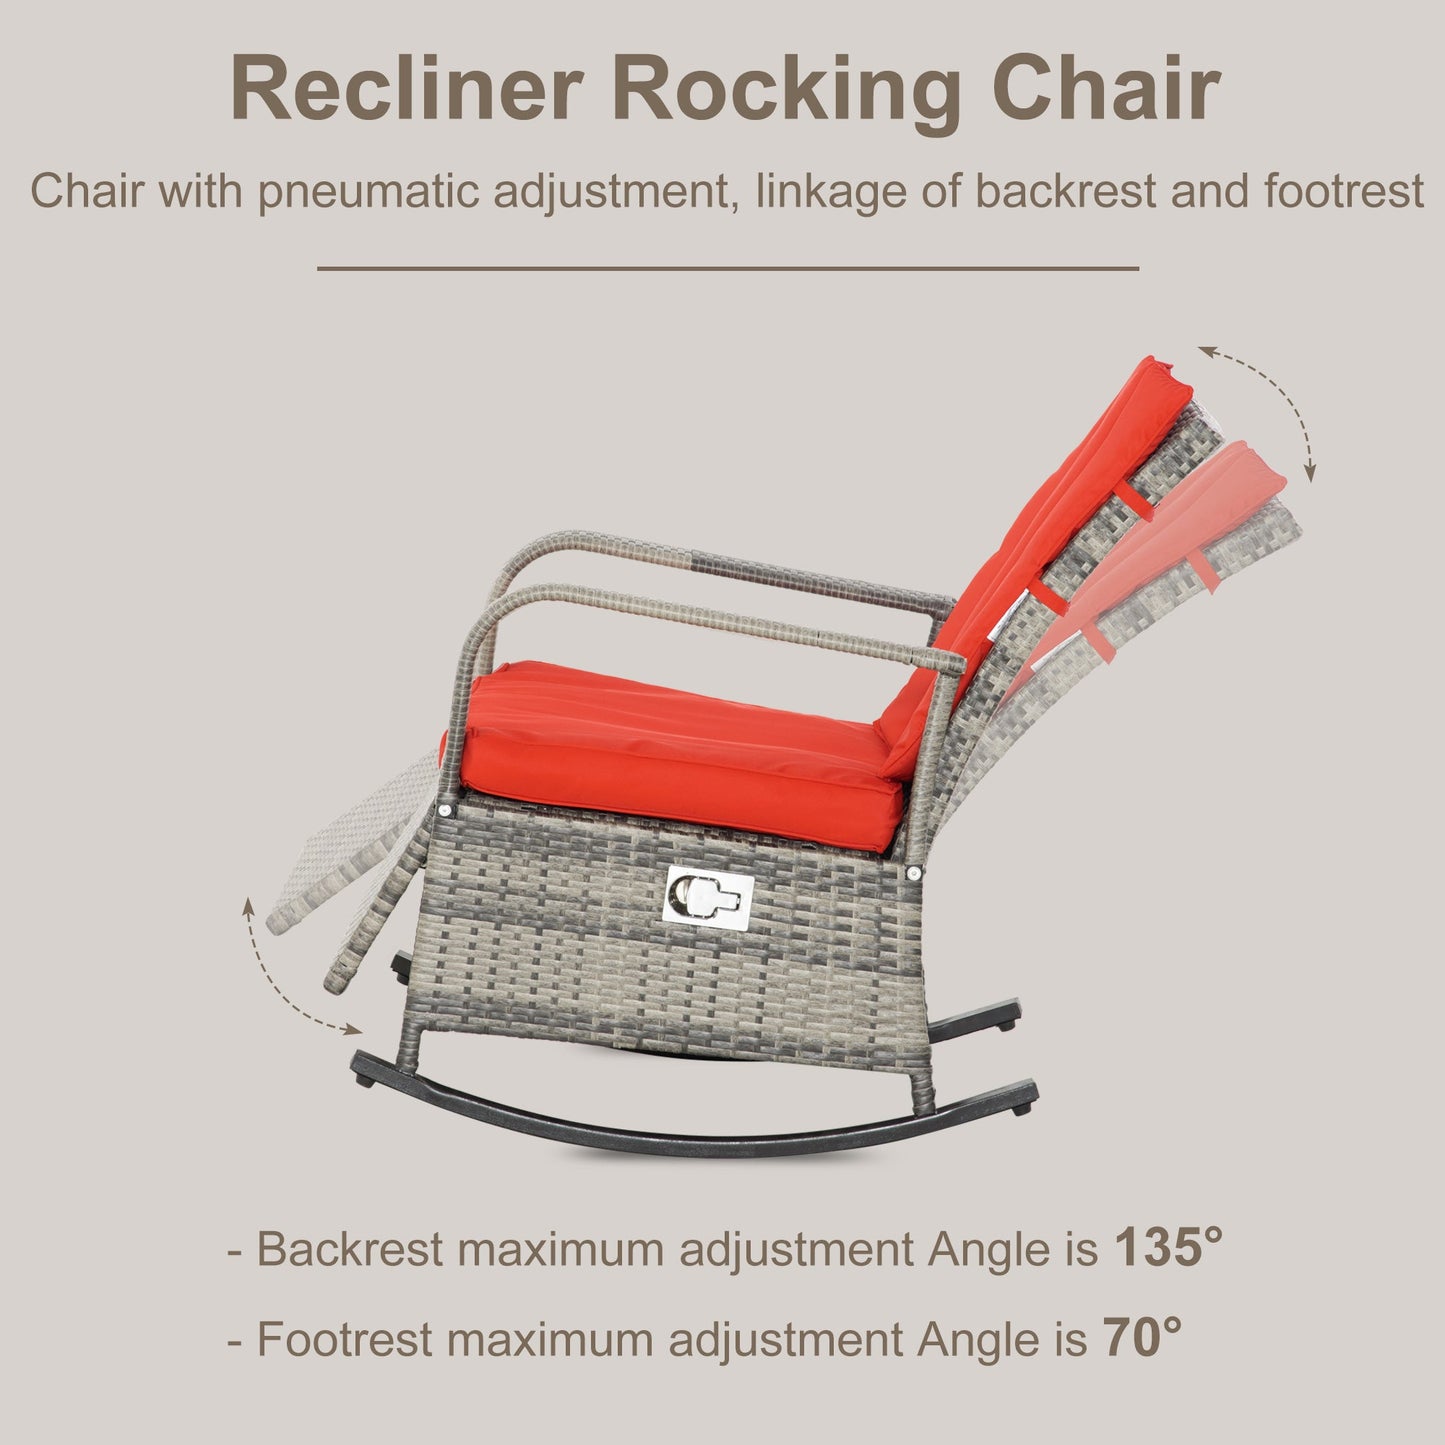 Outdoor and Garden-Wicker Rocking Chair Outdoor Recliner Chari with Soft Cushion, Adjustable Footrest, Max. 135 Degree Backrest, Red - Outdoor Style Company